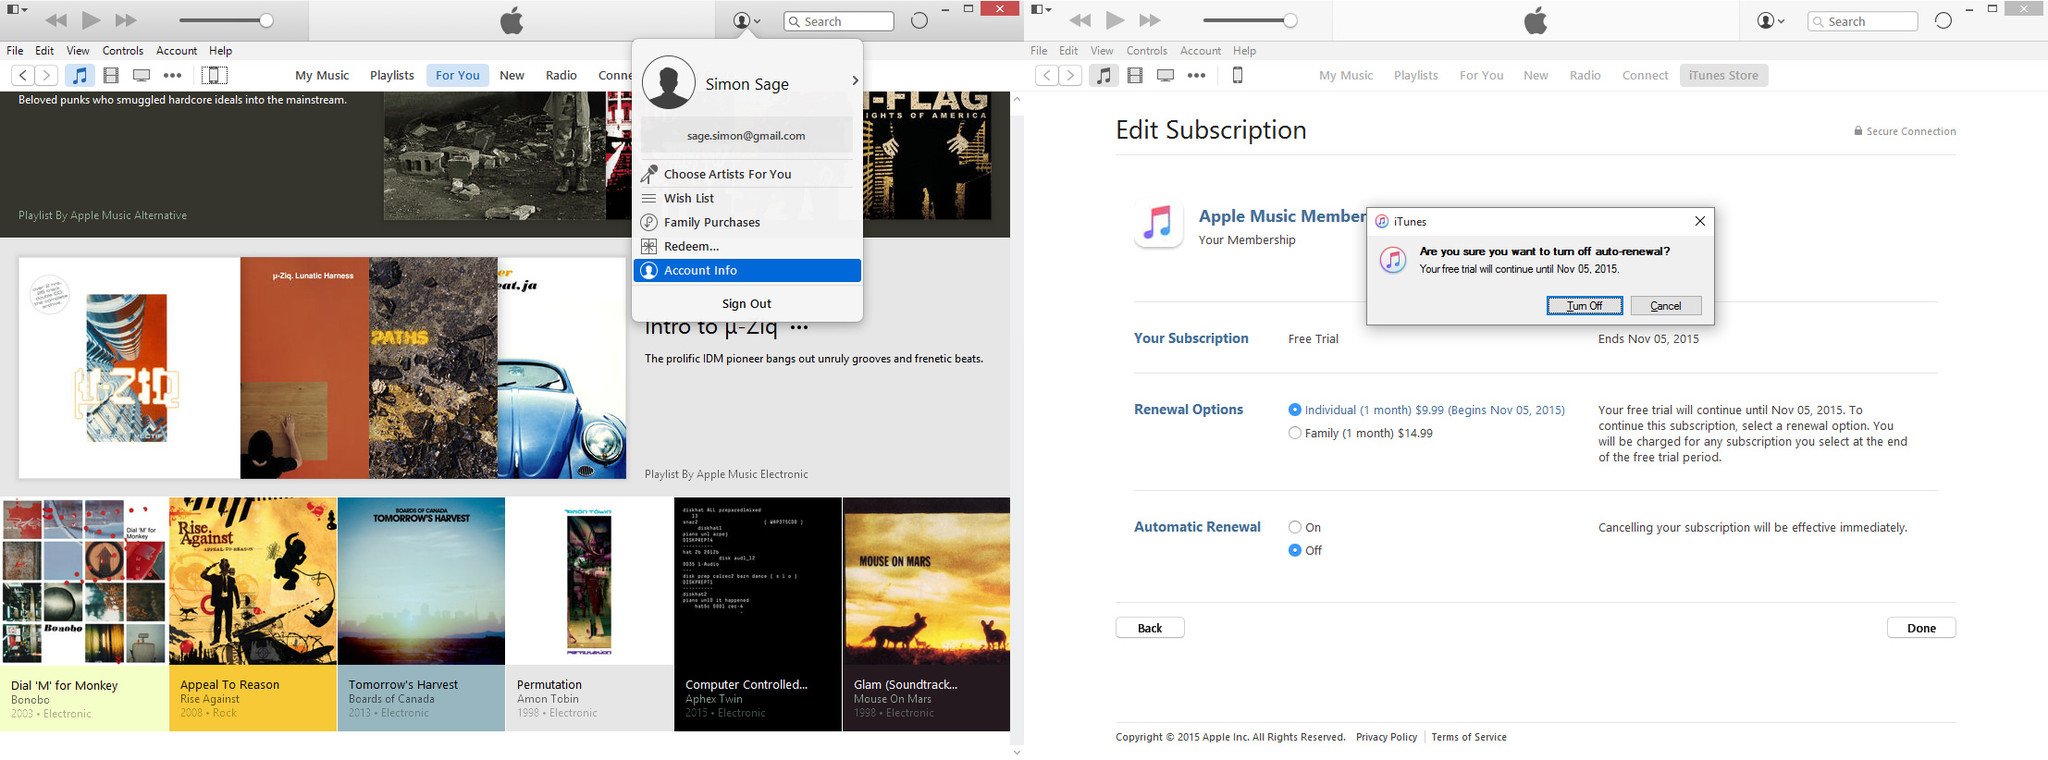 how to get music from windows media to itunes